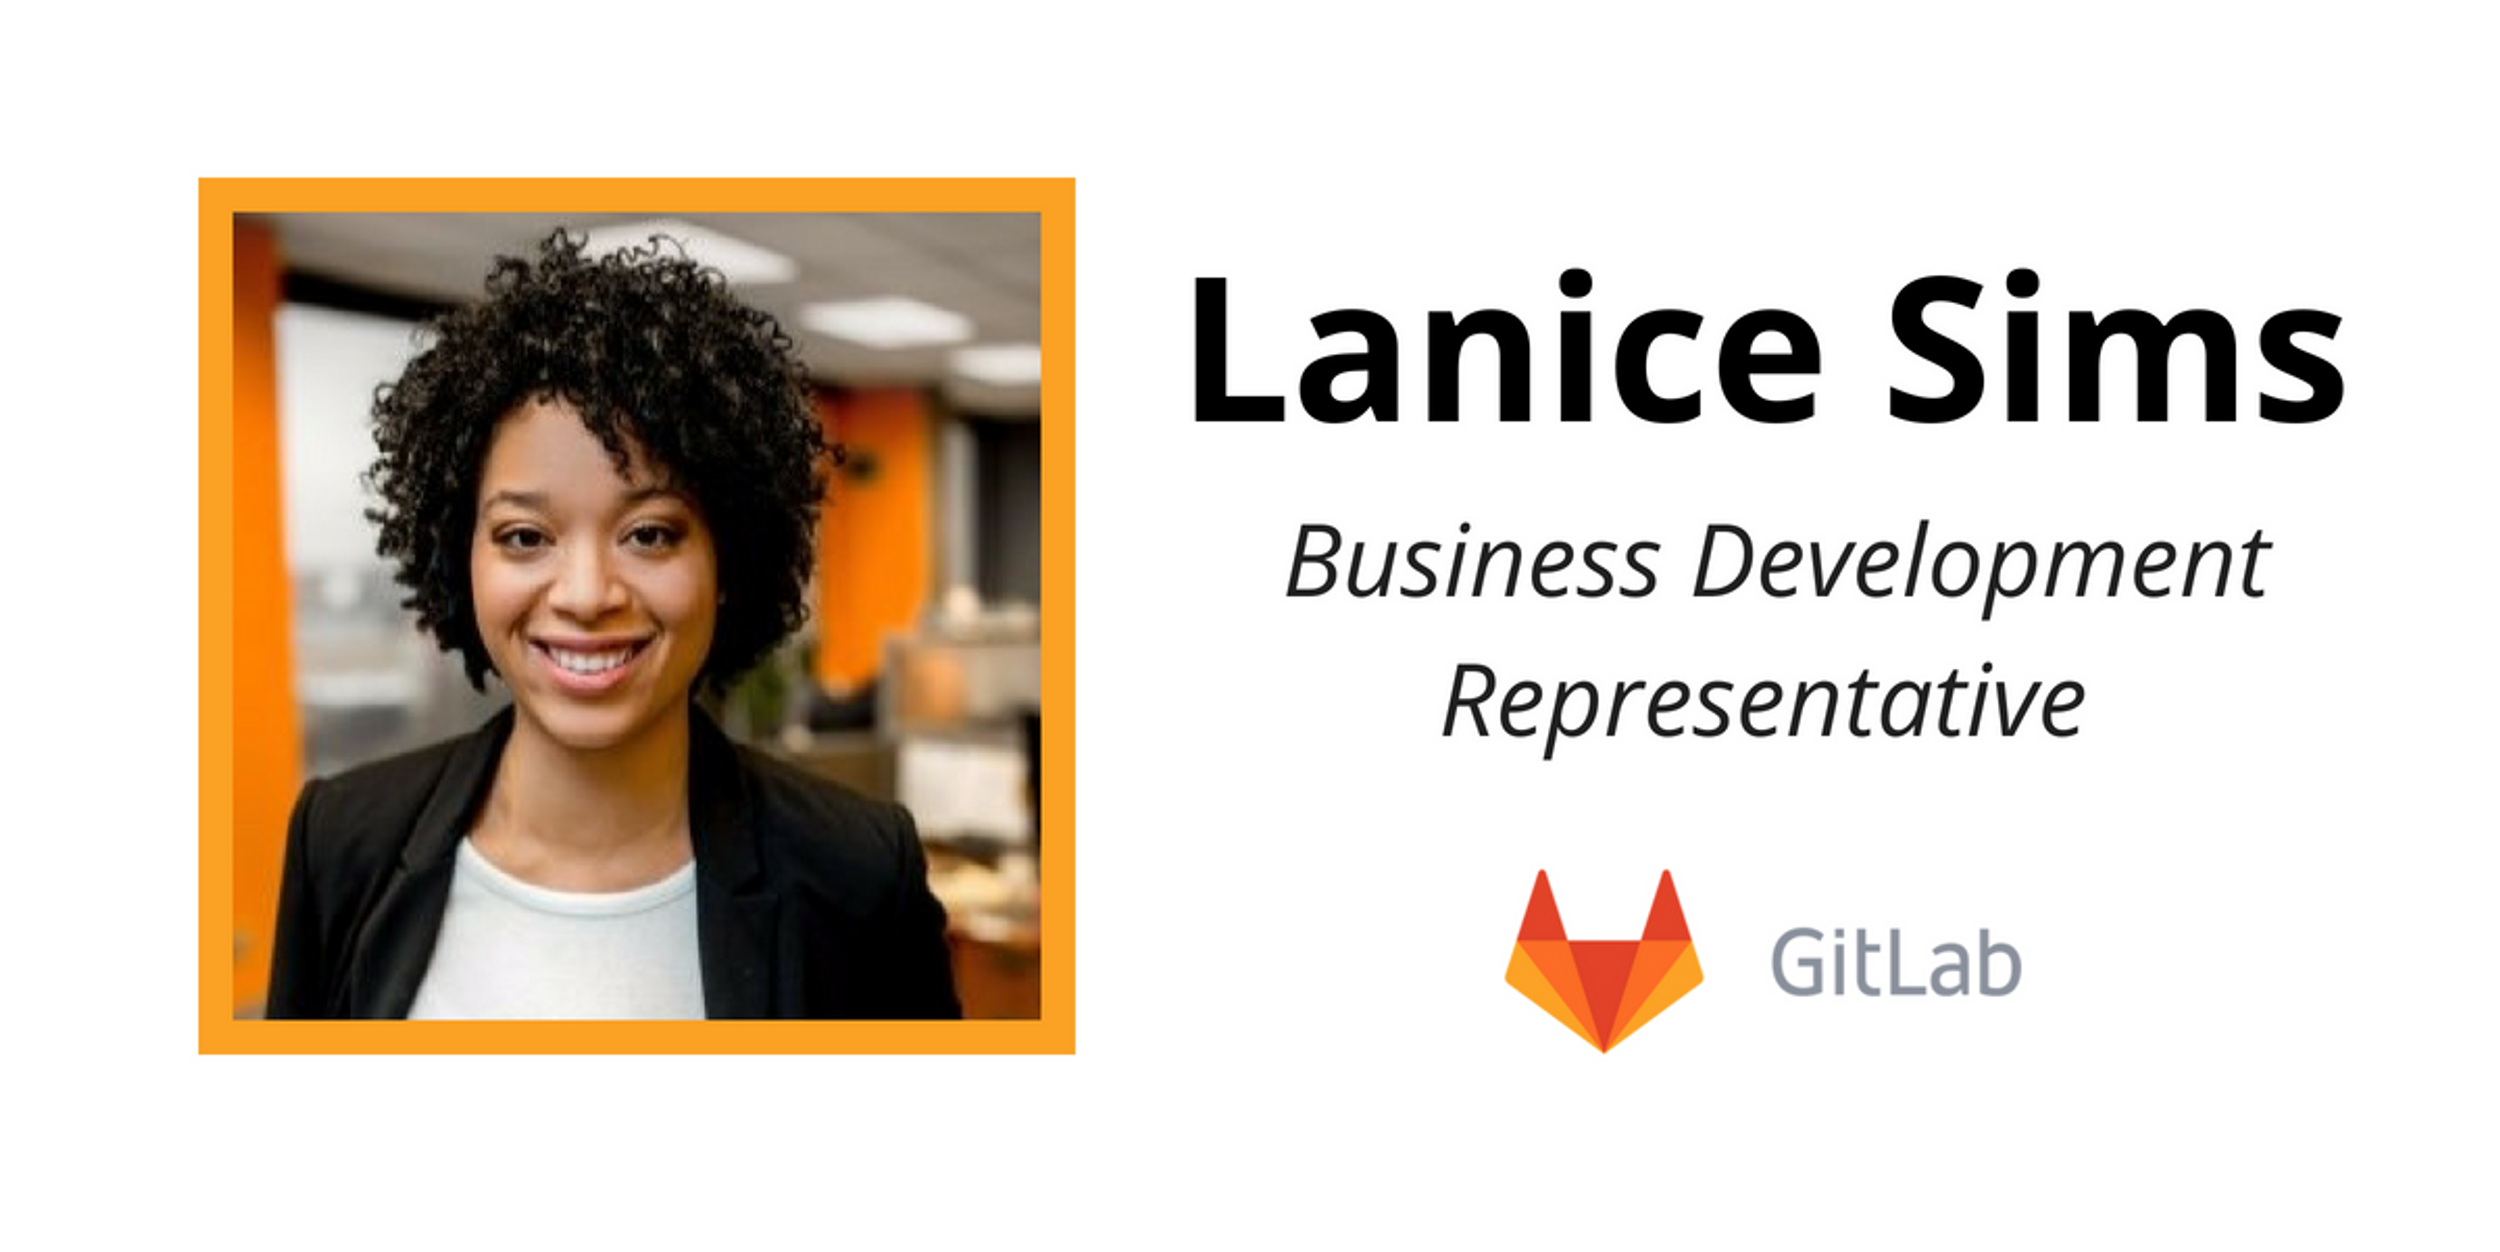 This GitLab BDR Shares How The Whole Company Works Remotely and Challenges Biases